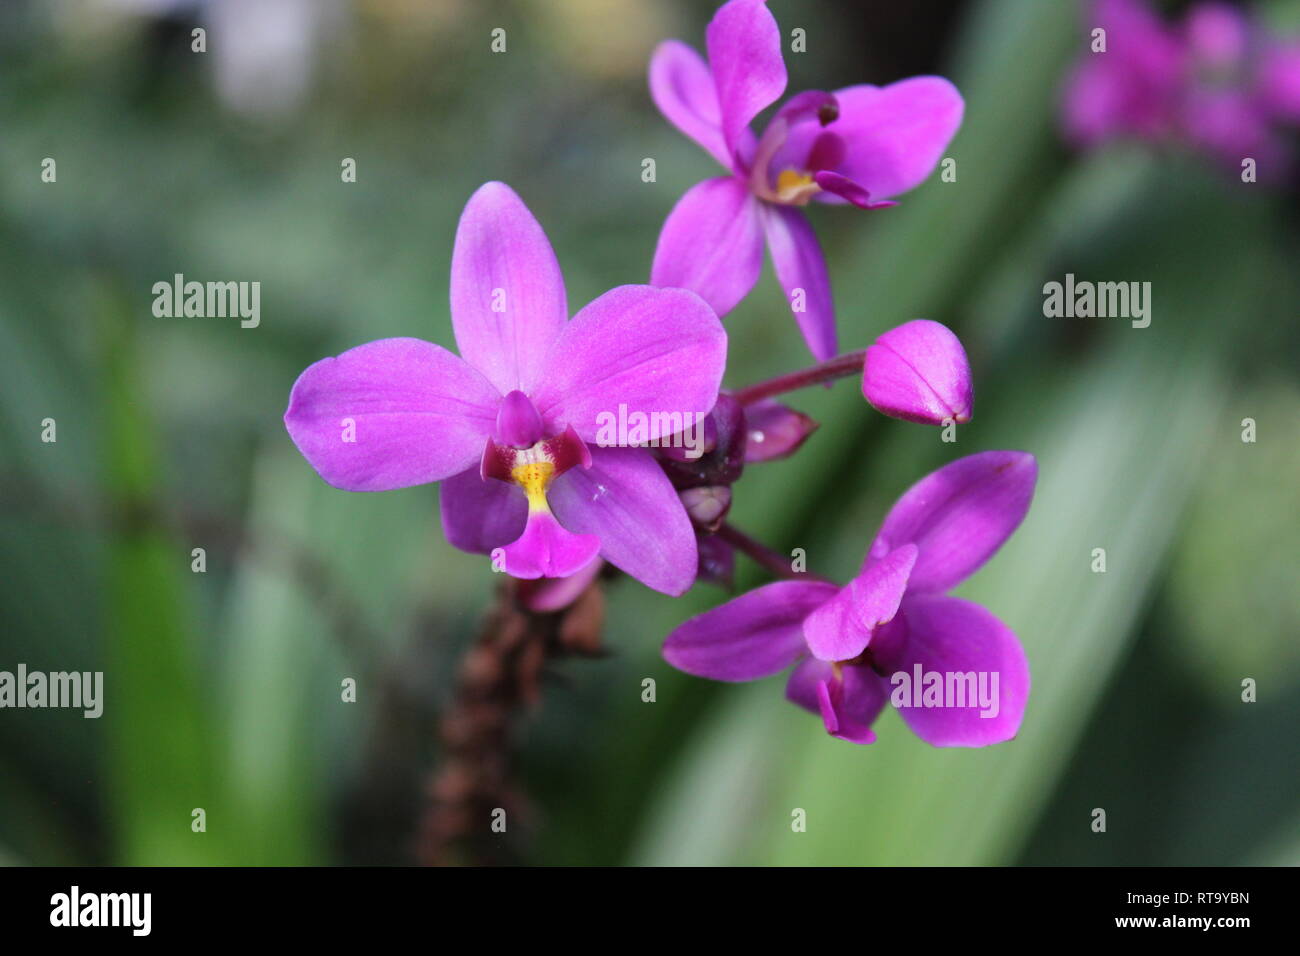 Beautiful cultivated flowering, Orchid, Ground Orchid, Clawed Spathoglottis grapette plant growing in the flower garden. Stock Photo